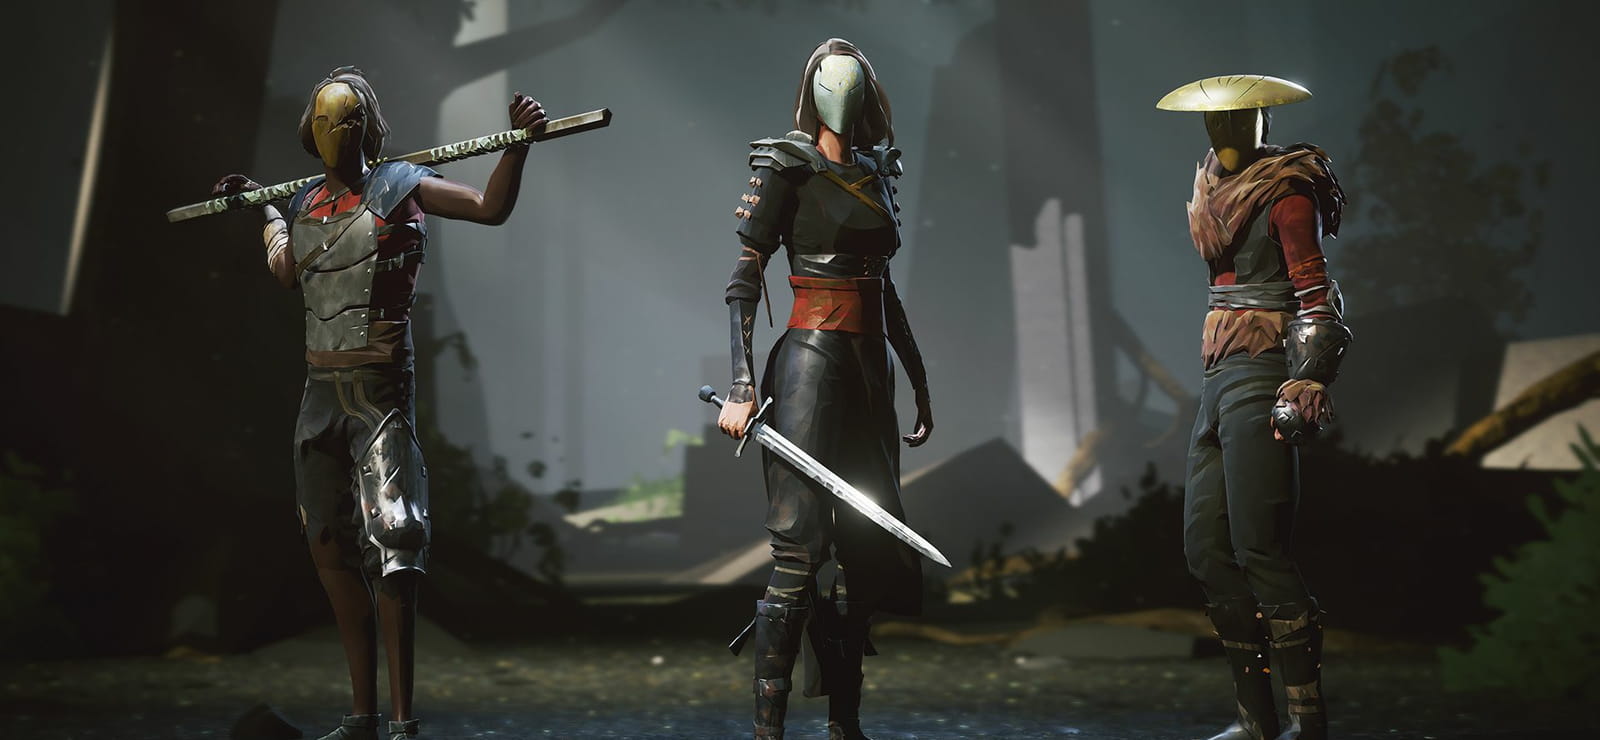 Absolver: Deluxe Edition Upgrade